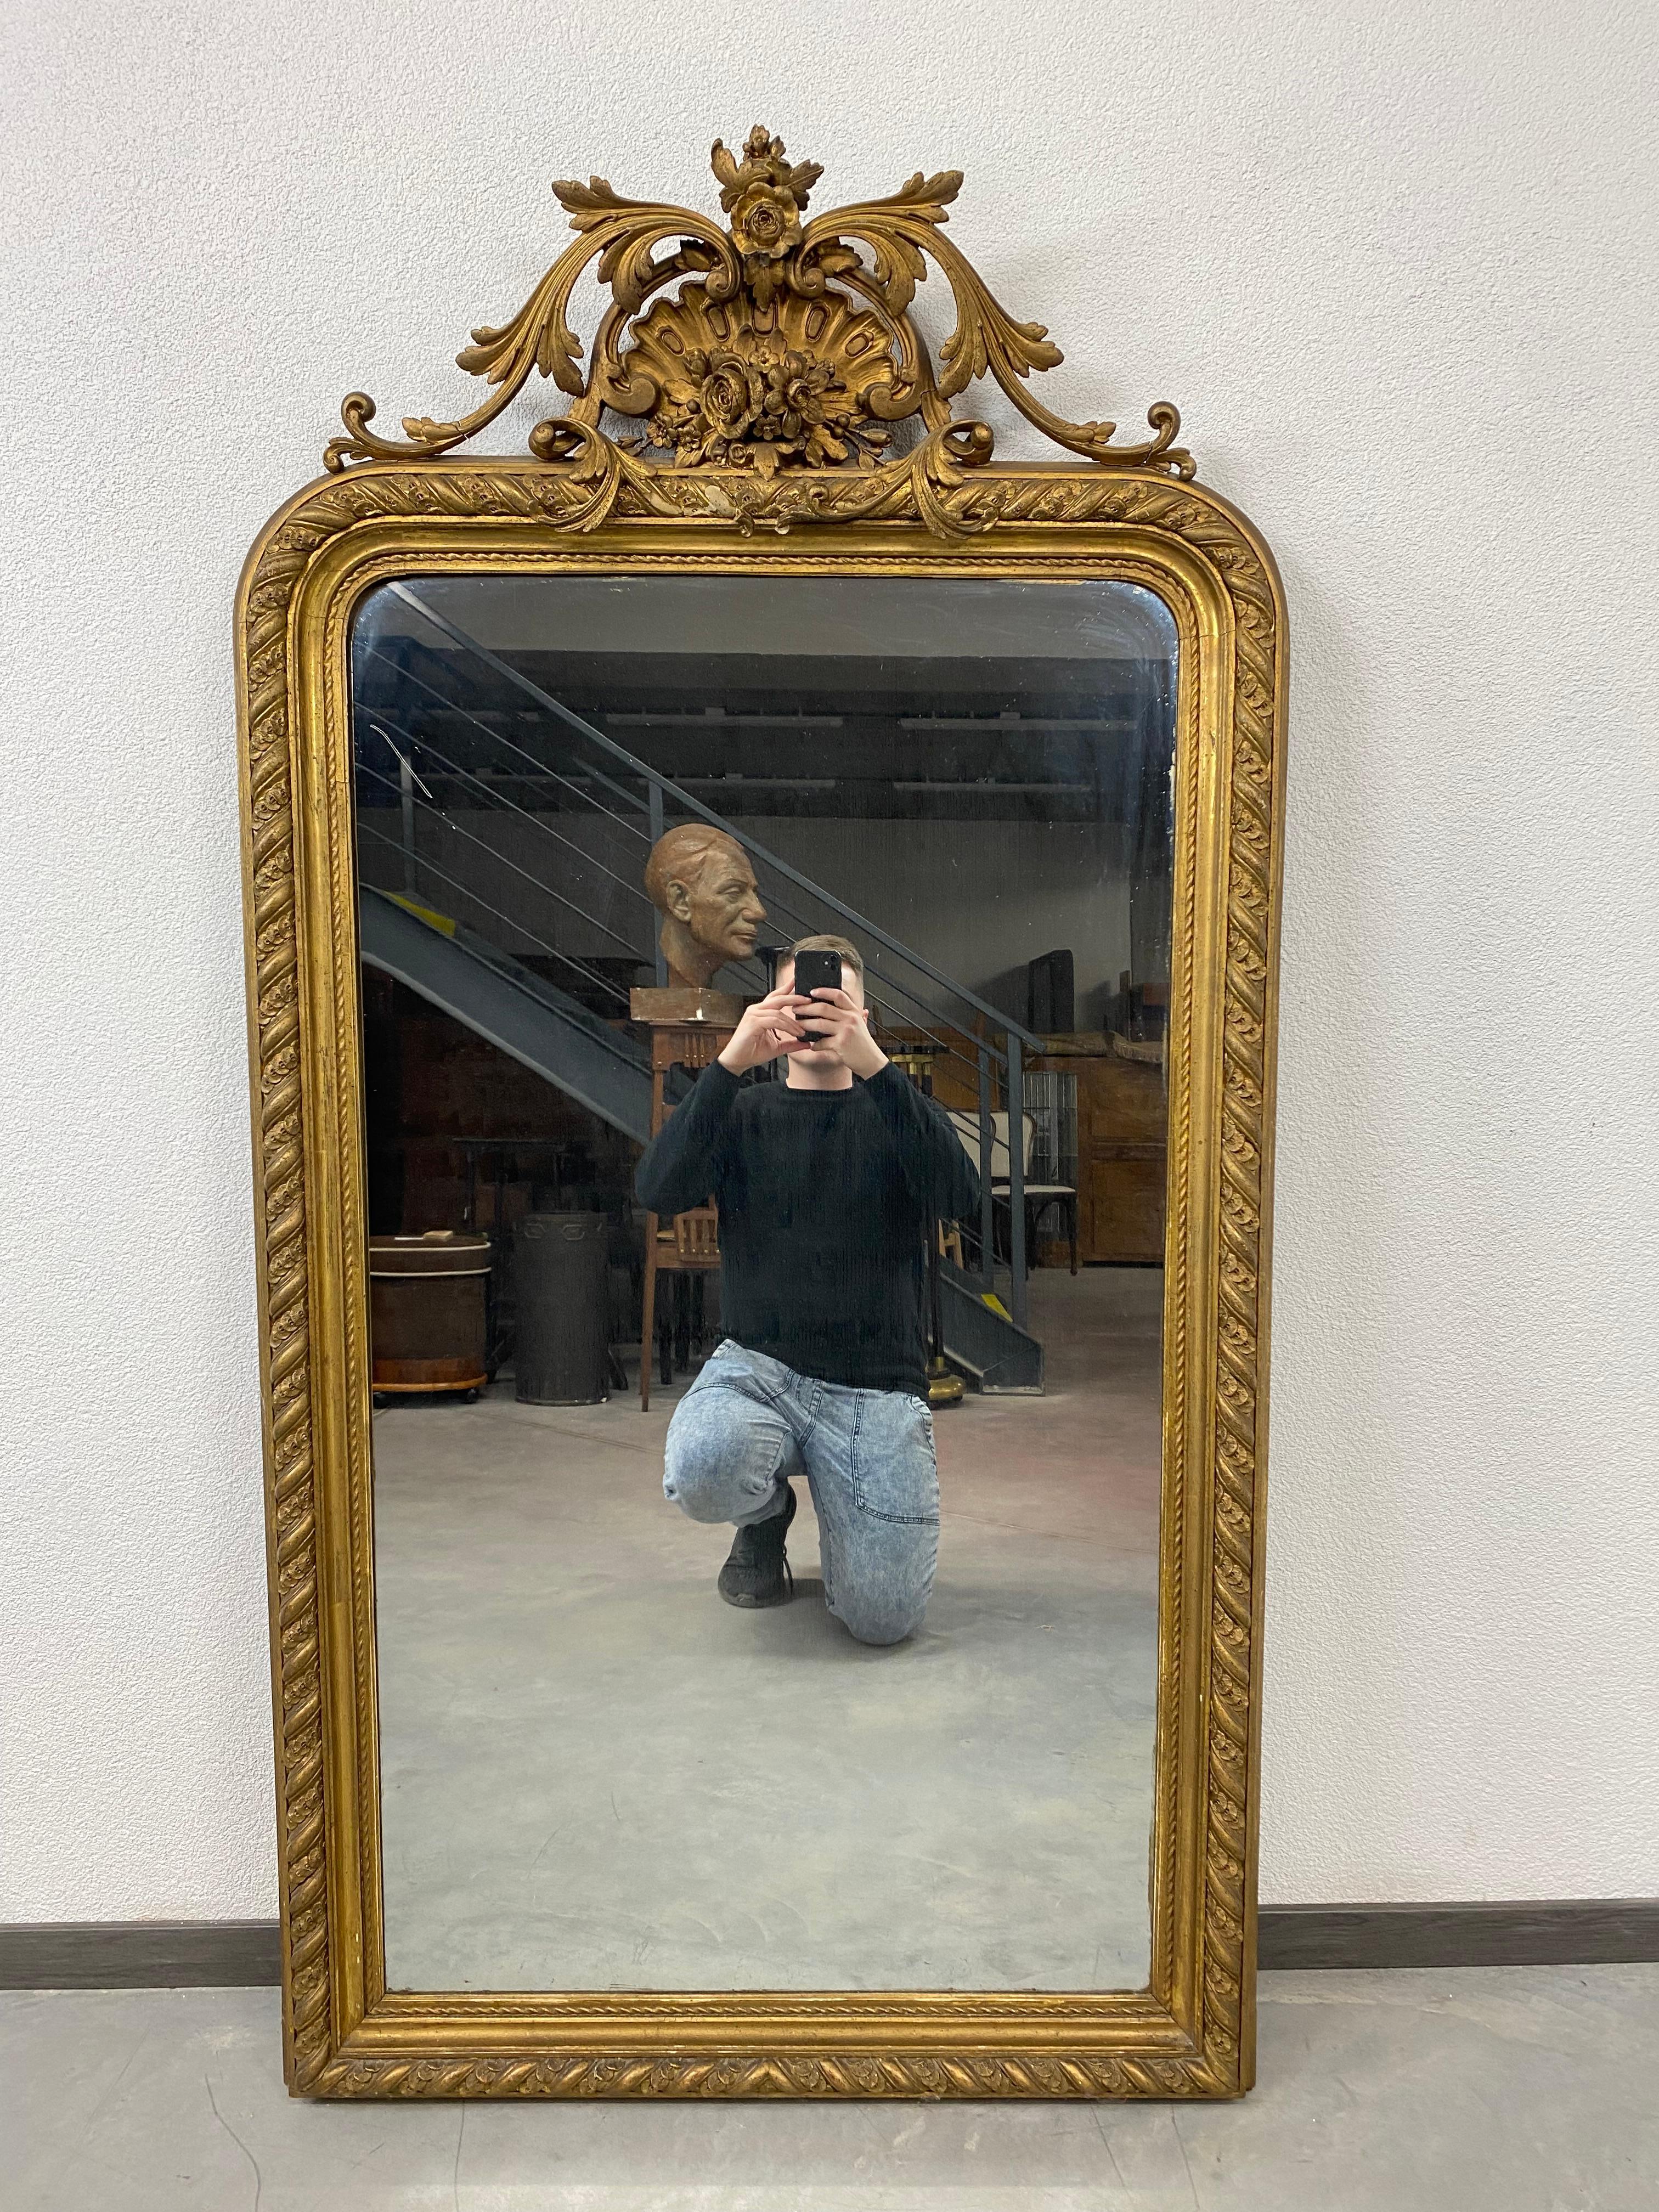 Slovak Large Rococo Style Wall Mirror, circa 1850 For Sale